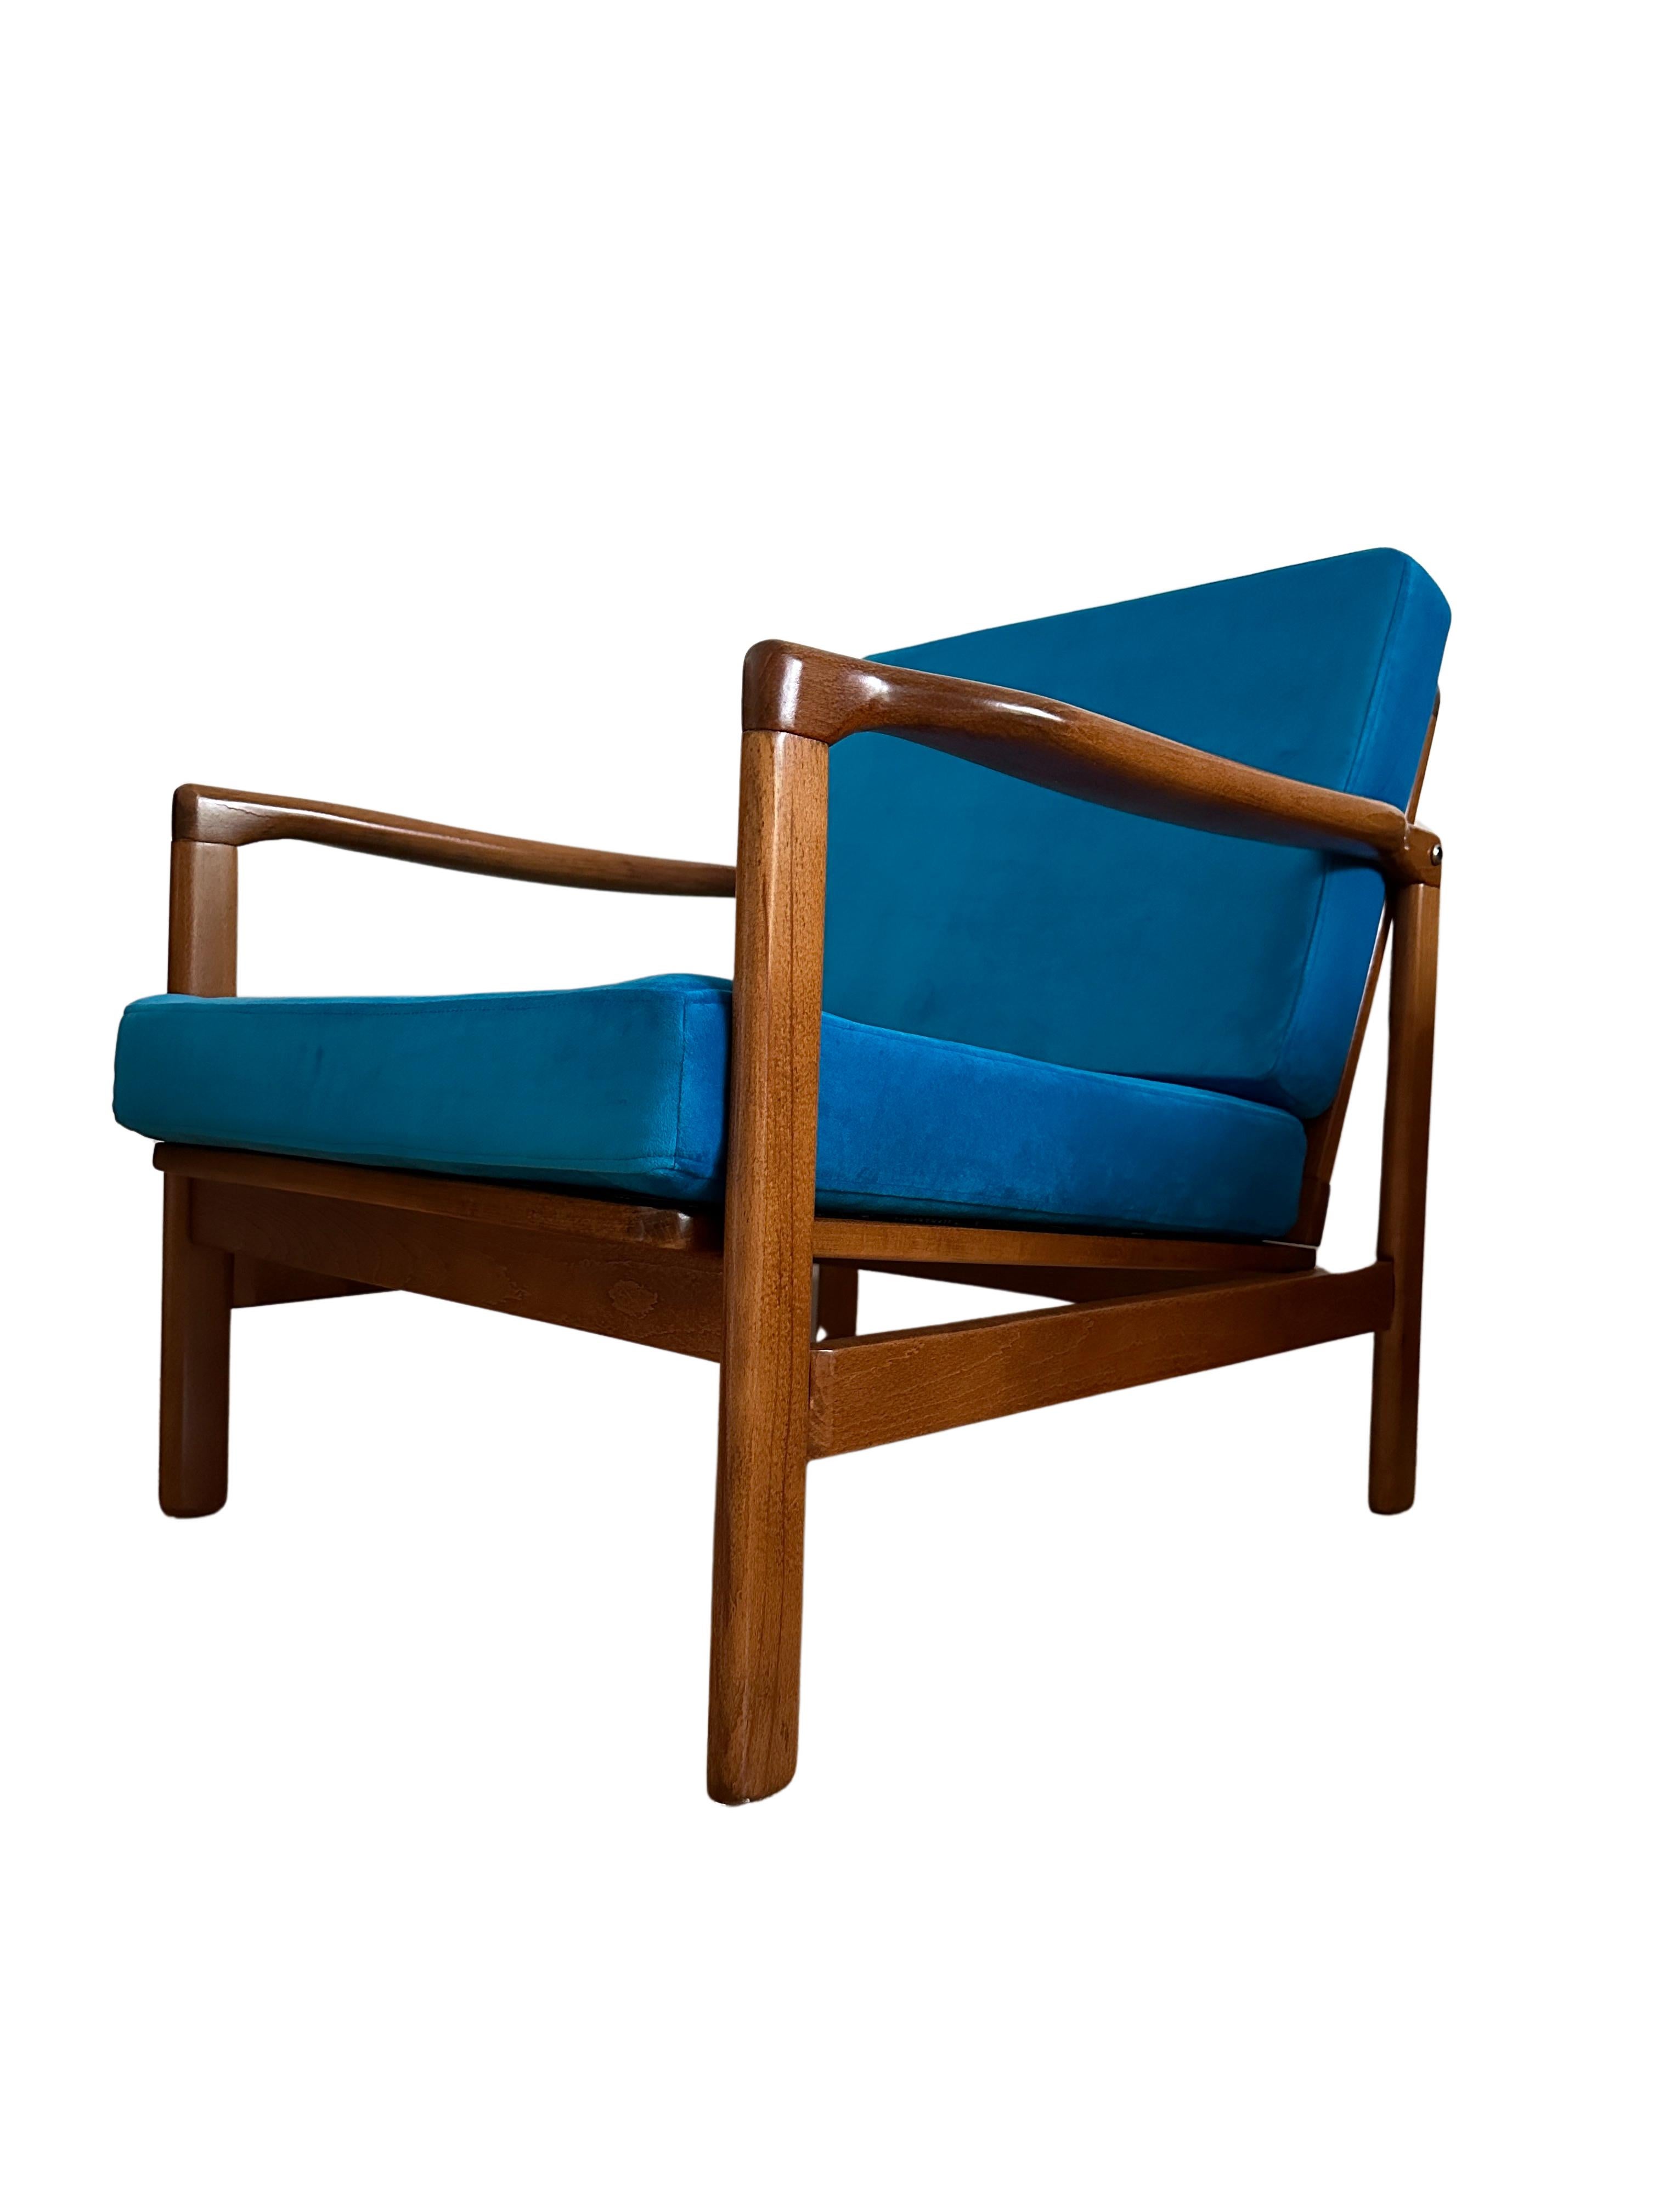 20th Century Set of Two Midcentury Armchairs, Blue Velvet Upholstery, Poland, 1960s For Sale